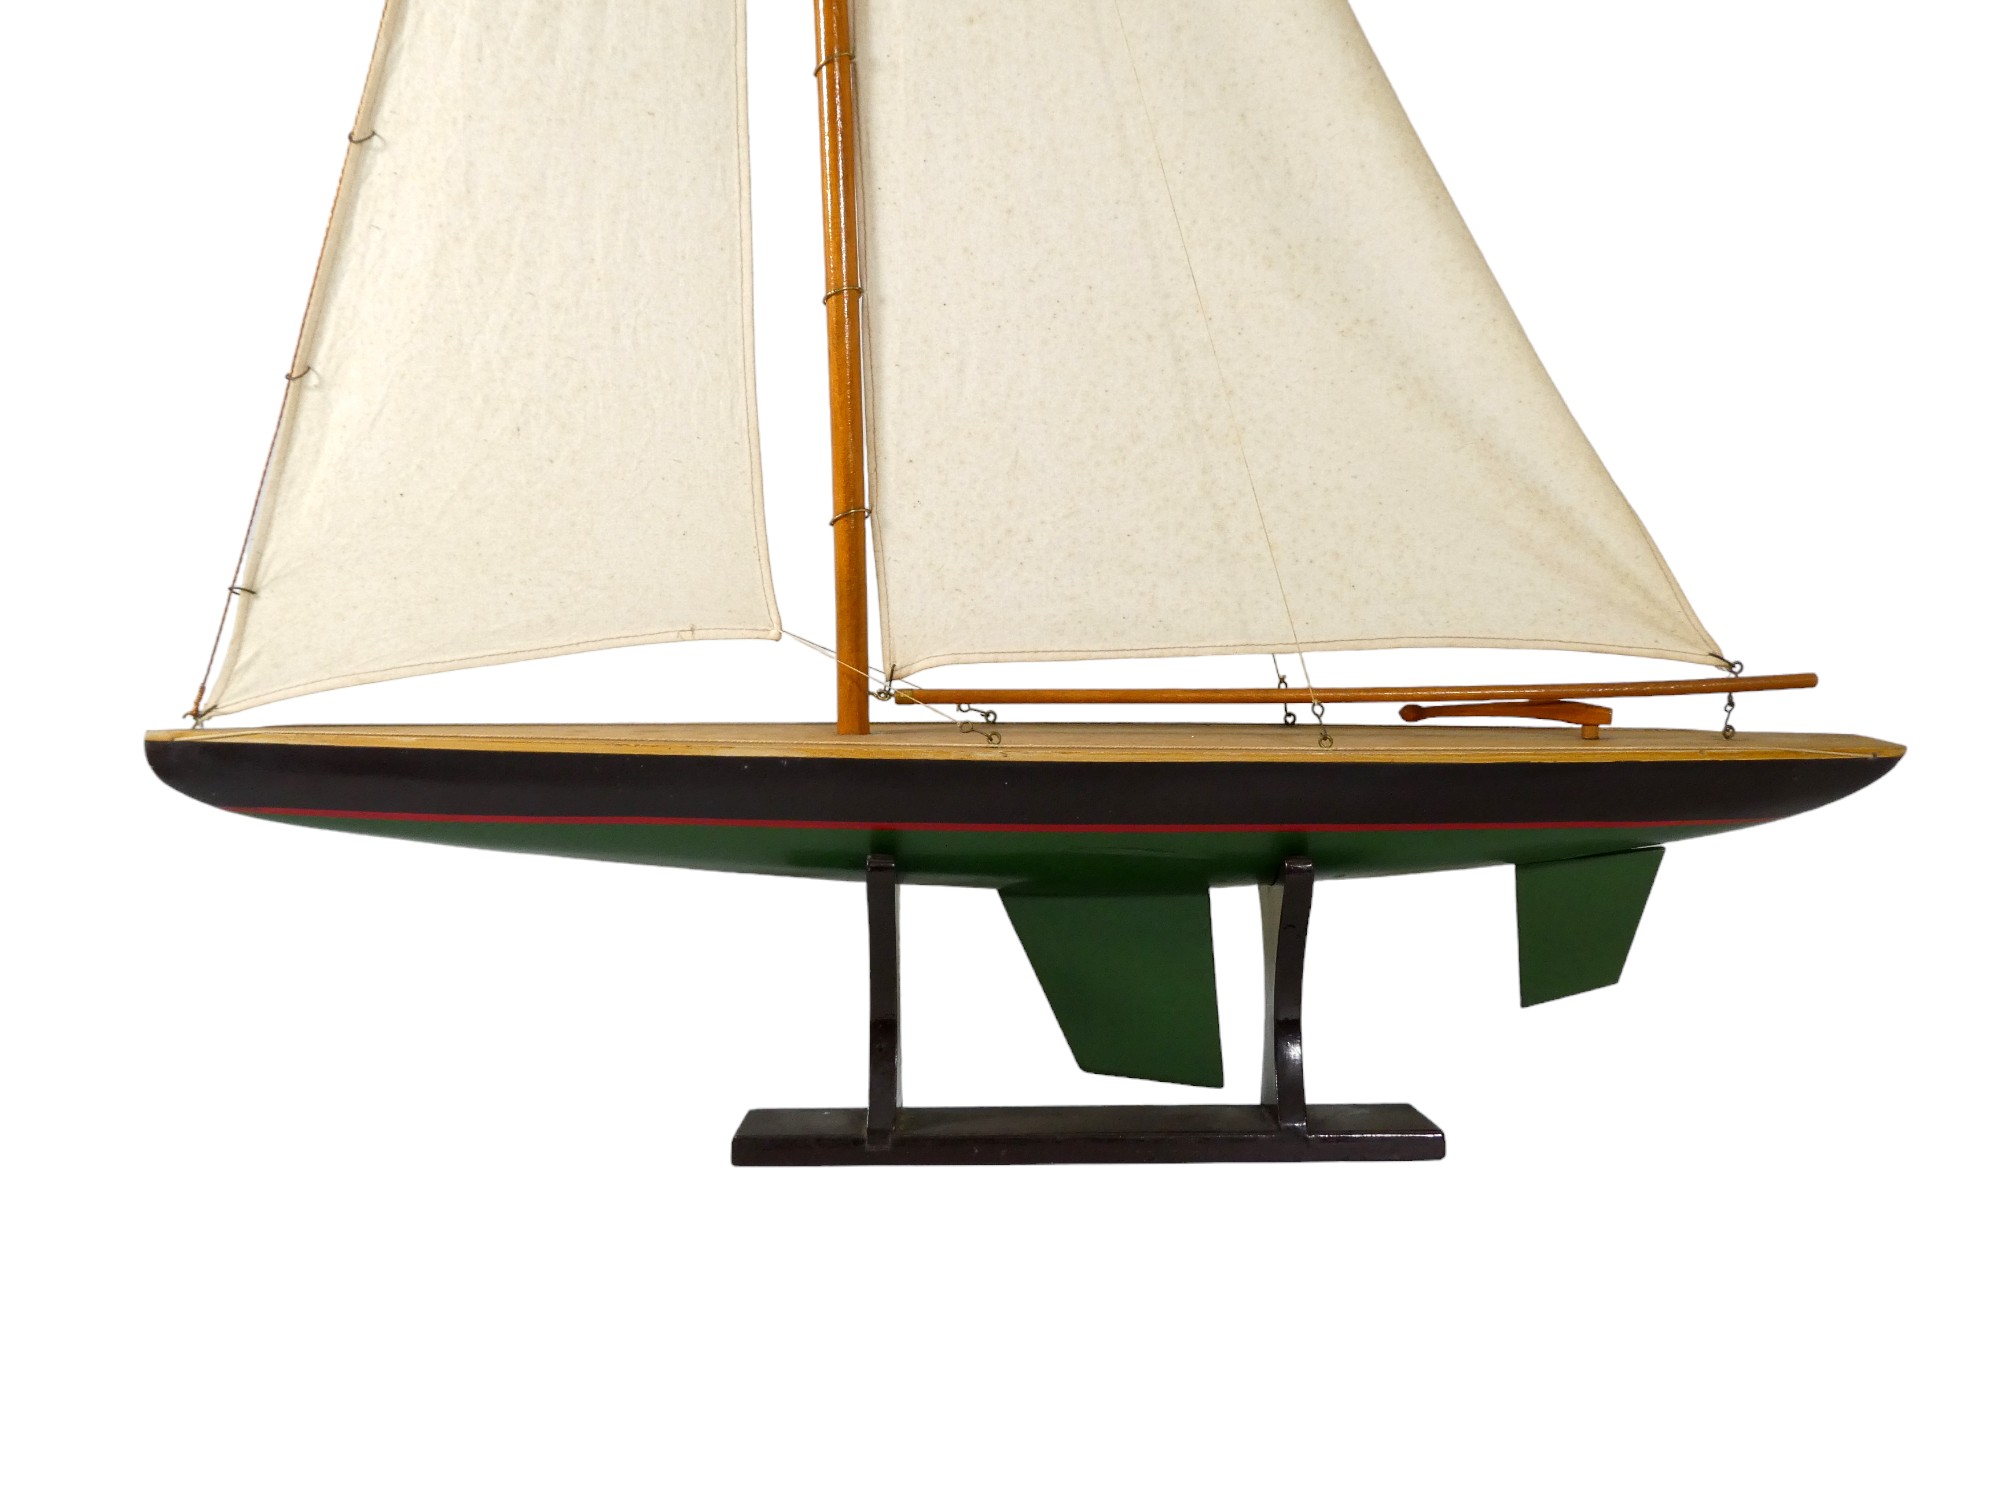 A 20th century pond yacht - Bermuda rig, with black hull, red boot line and green hull, height - Image 2 of 4